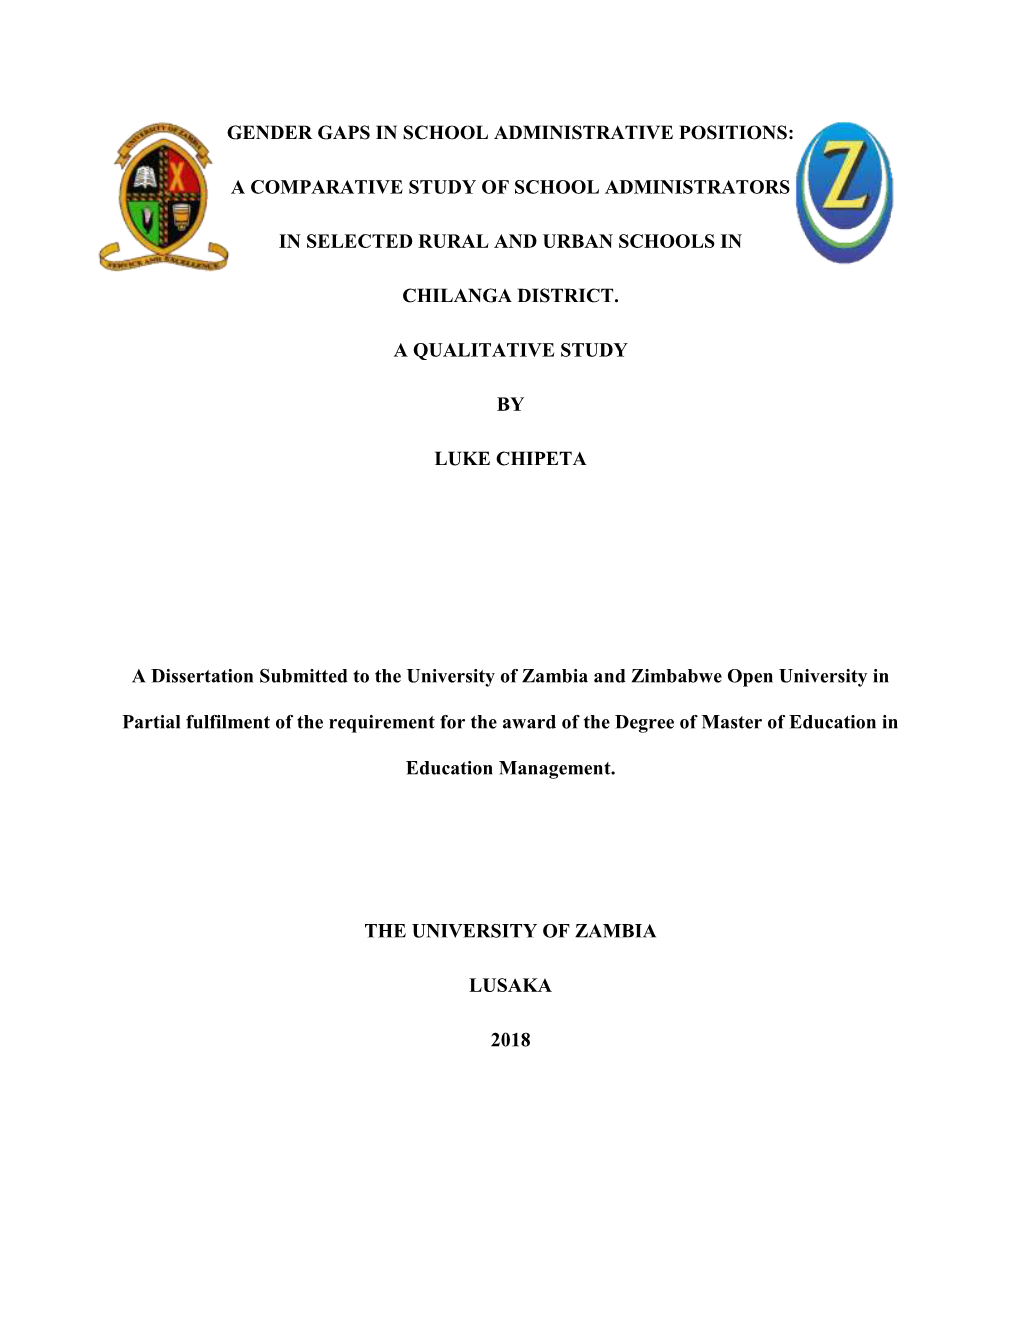 Gender Gaps in School Administrative Positions: a Comparative Study of School Administrators in Selected Rural and Urban Schools in Chilanga District